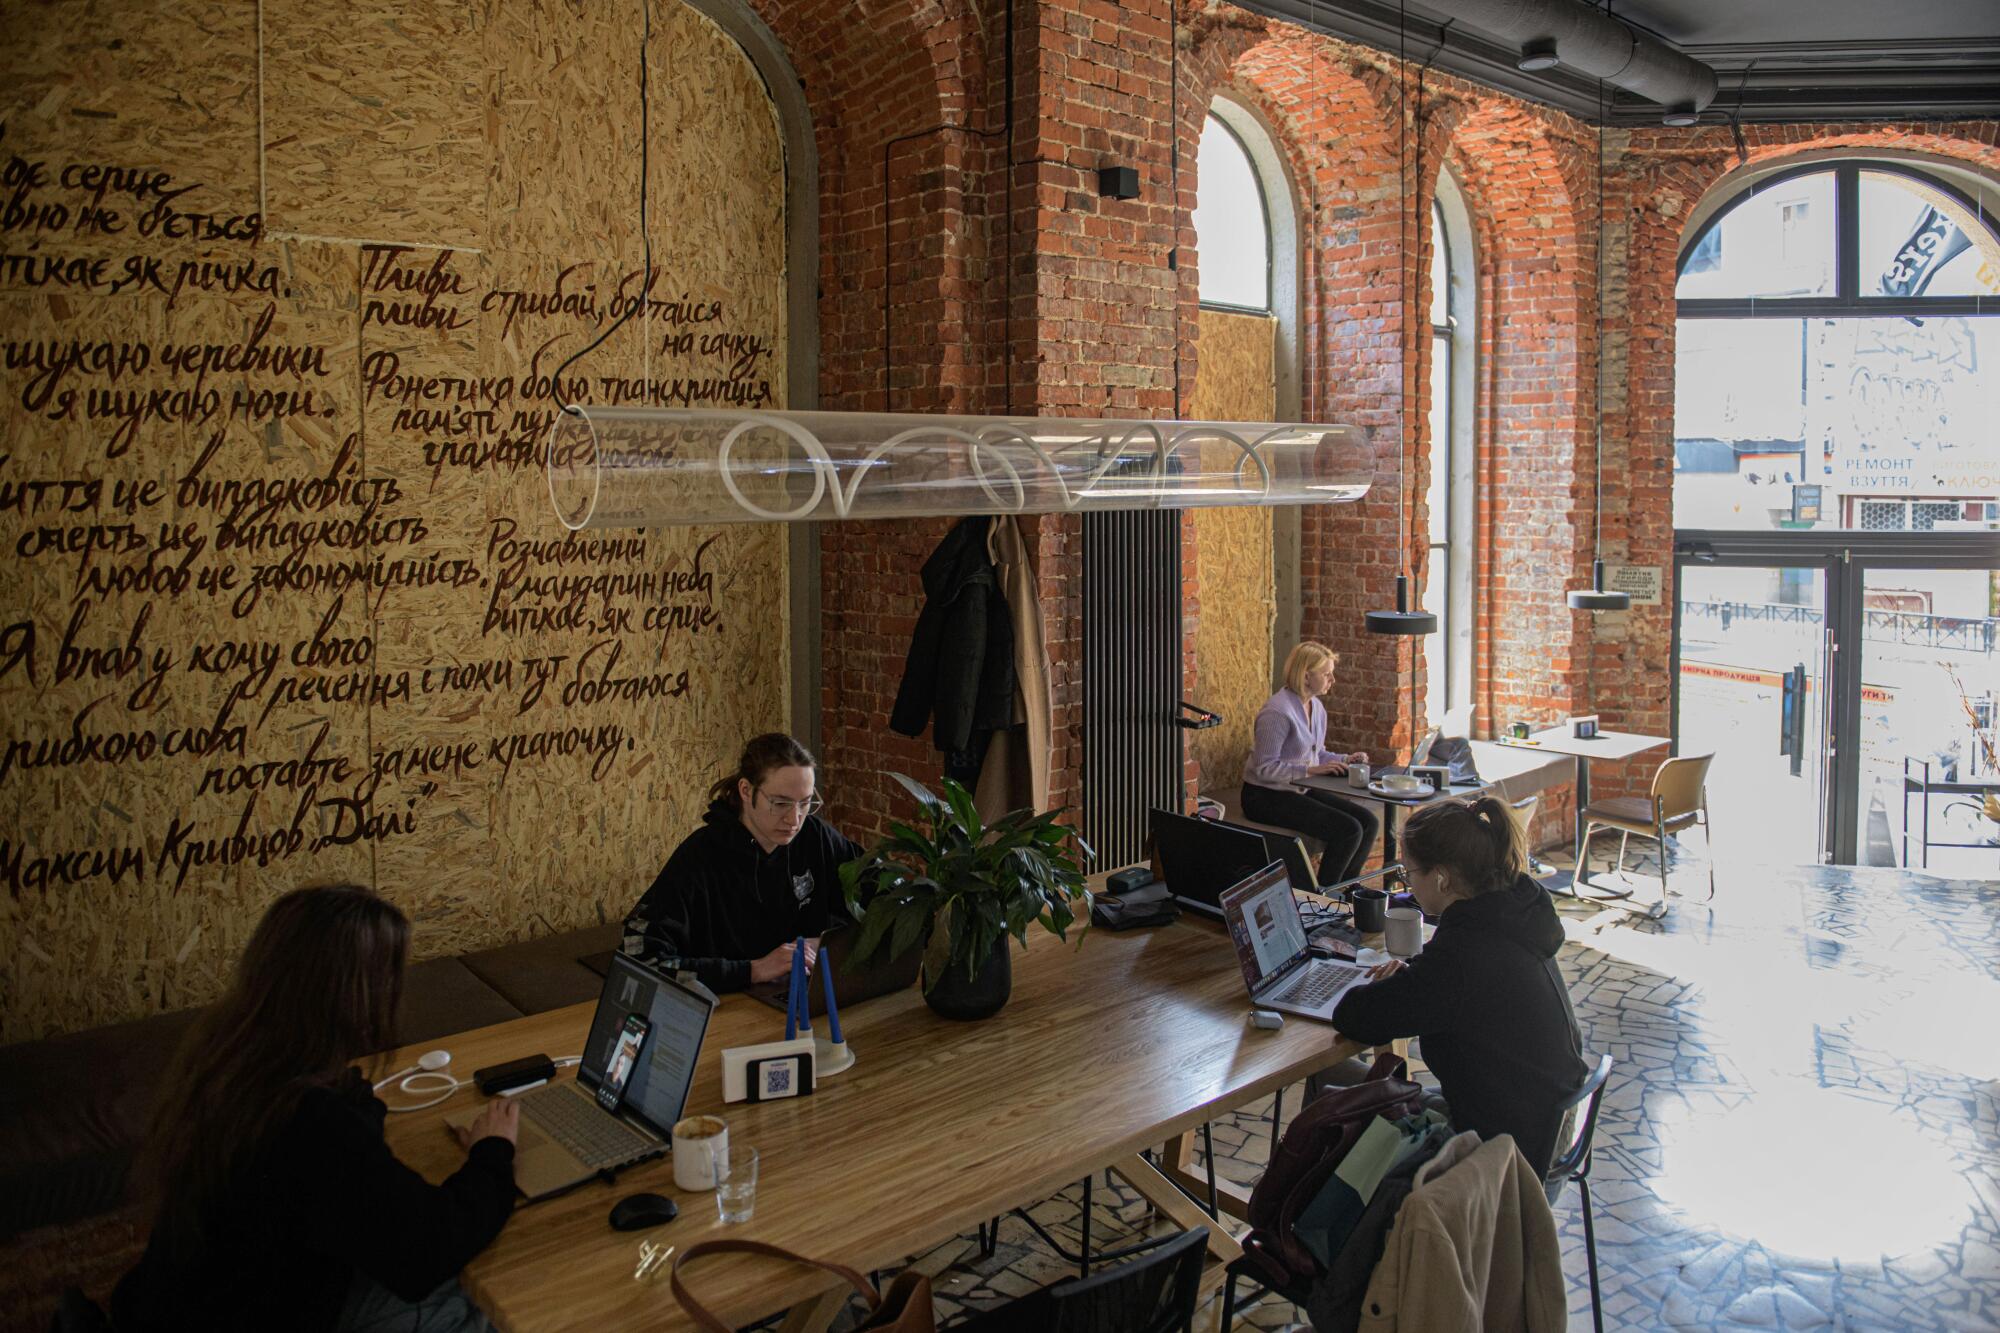 People work on their laptops in a cafe with boarded-up windows, with sunlight streaming in through other windows and doors.